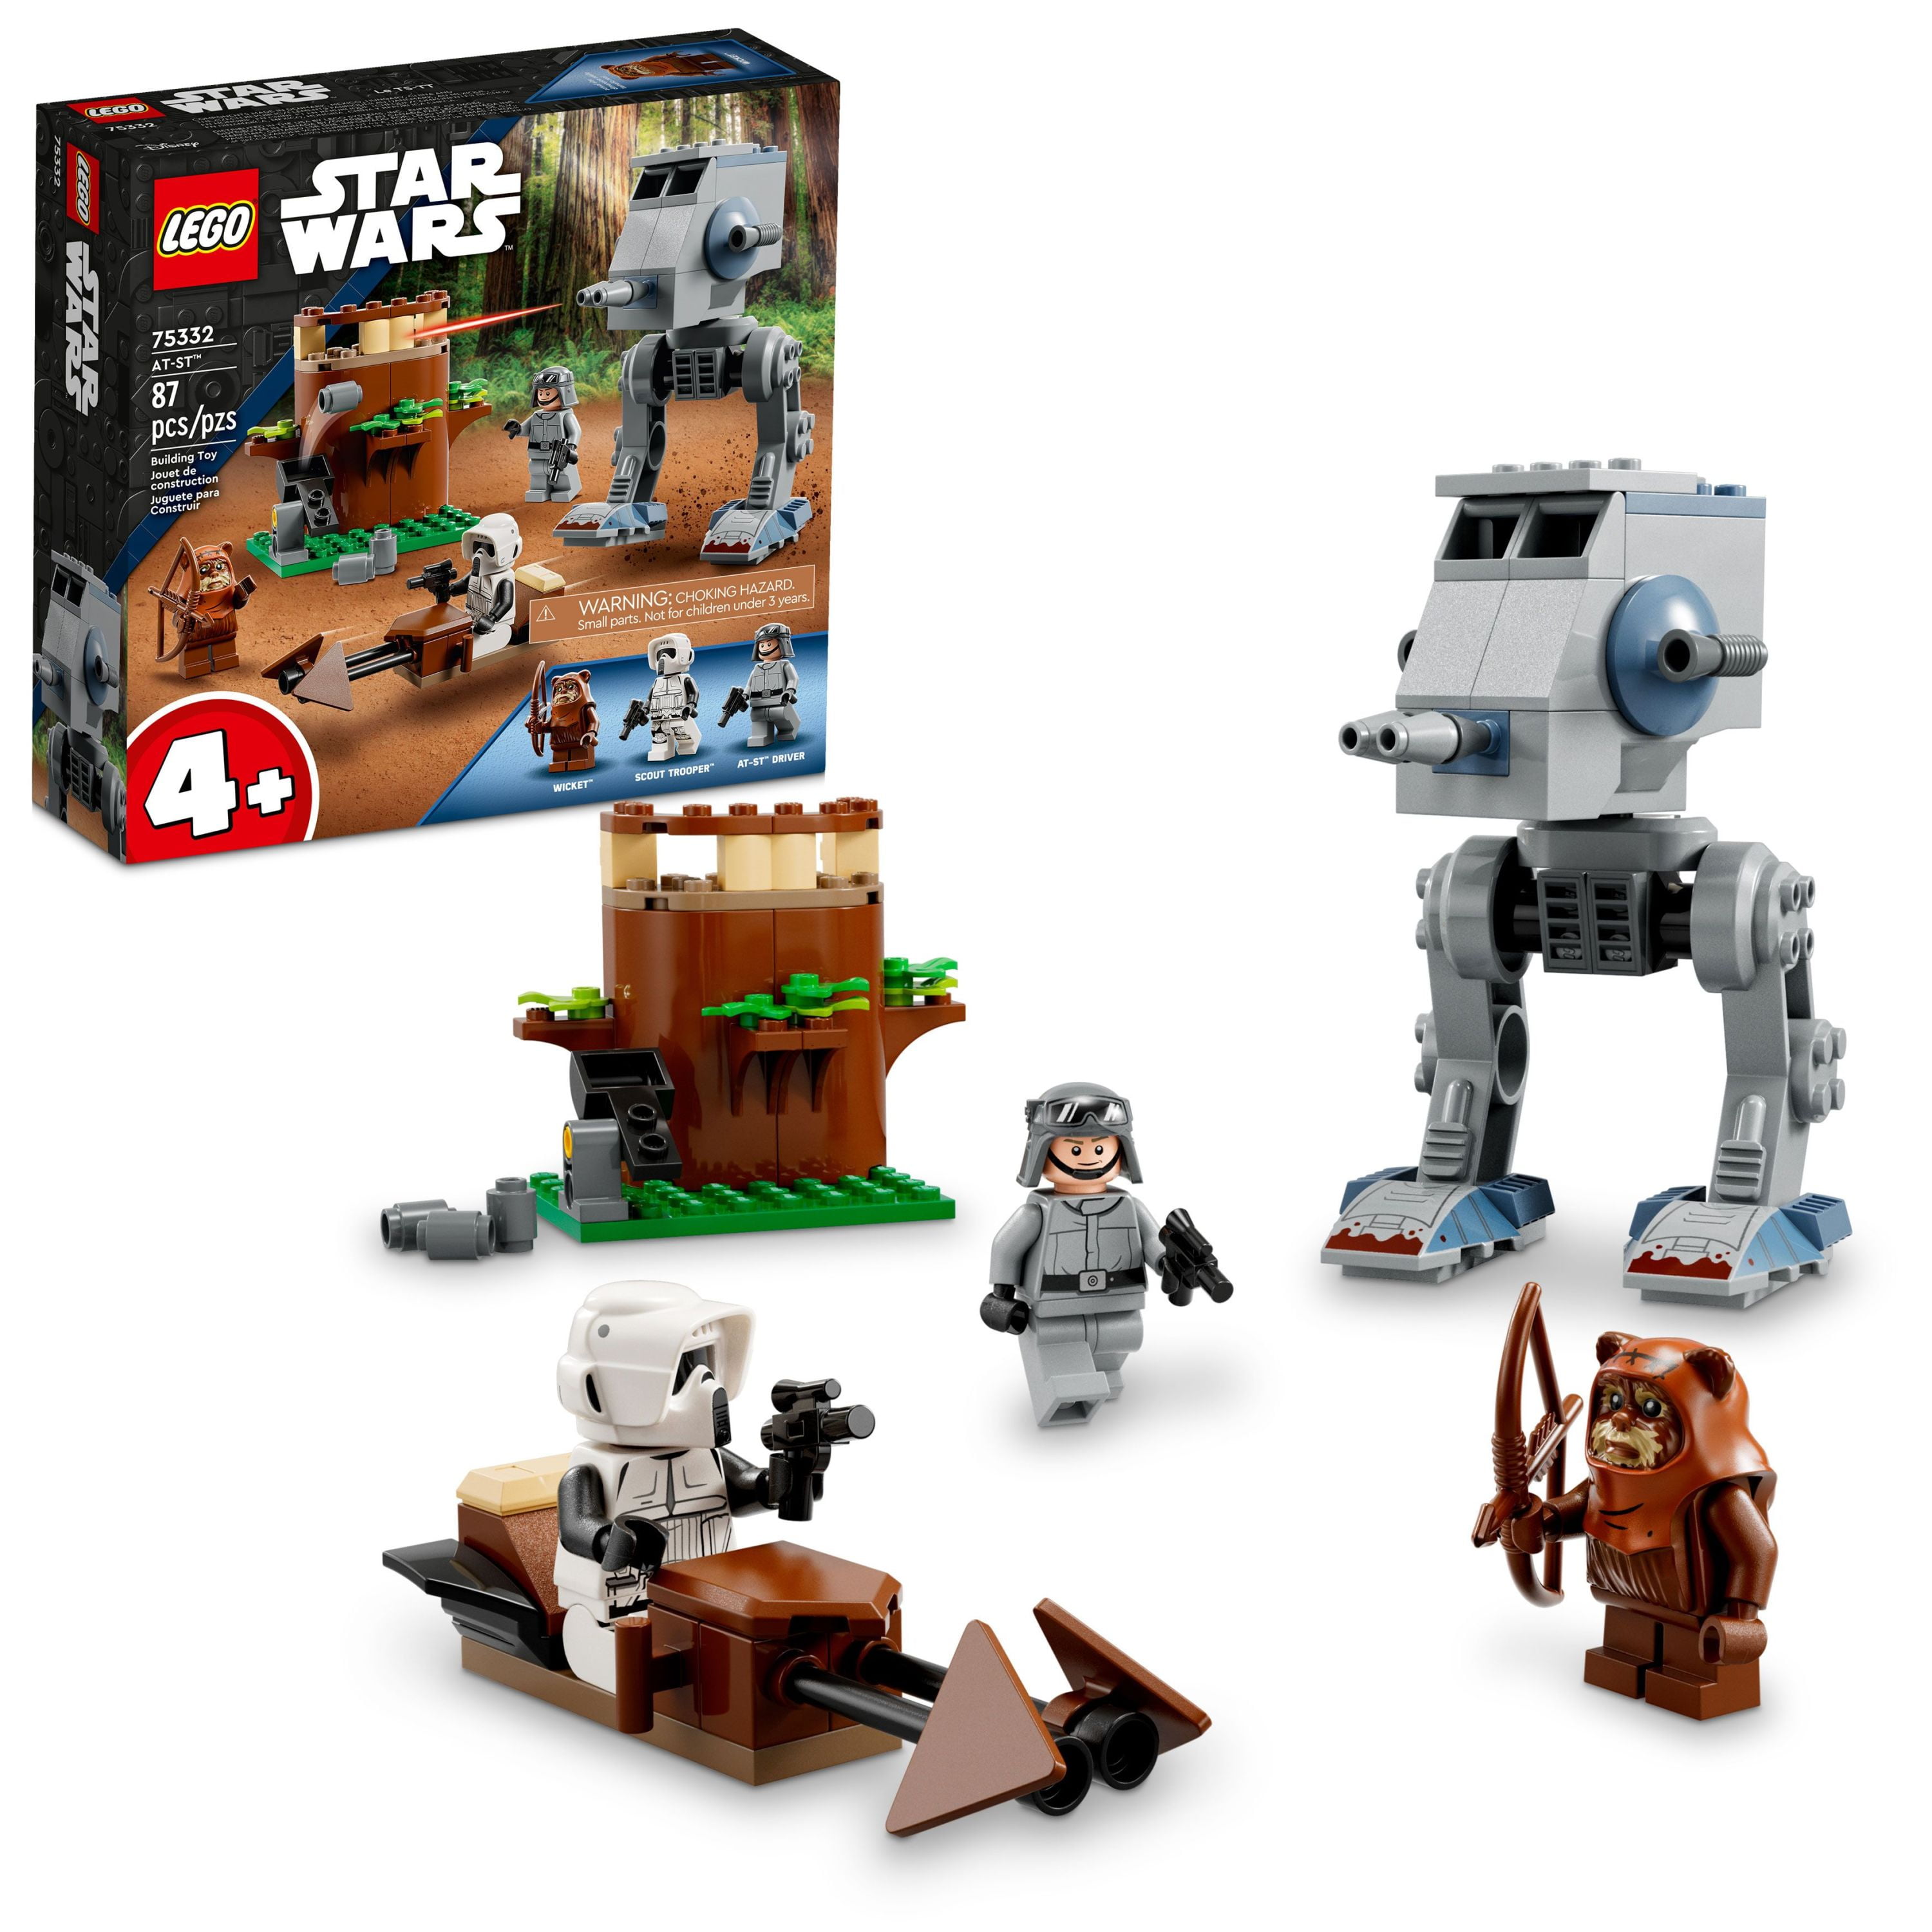 Playful Automatisering Giotto Dibondon LEGO Star Wars AT-ST 75332, Construction Toy for Preschool Kids Aged 4 Plus  with Wicket the Ewok & Scout Trooper Minifigures, Incl. Starter Brick, 2022  Set - Walmart.com